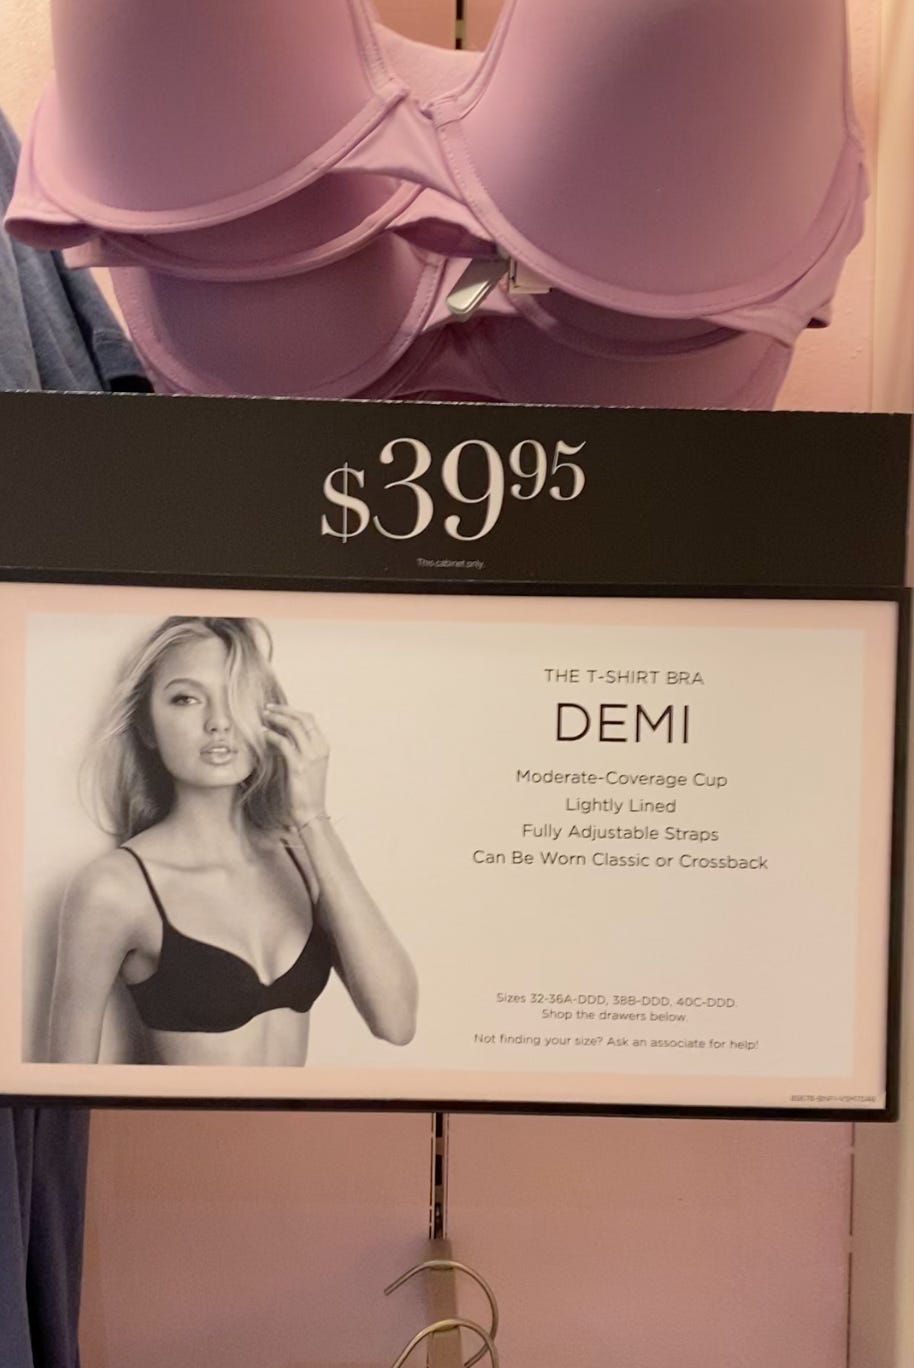 Store Review: Victoria's Secret - by Amy Odell - Back Row